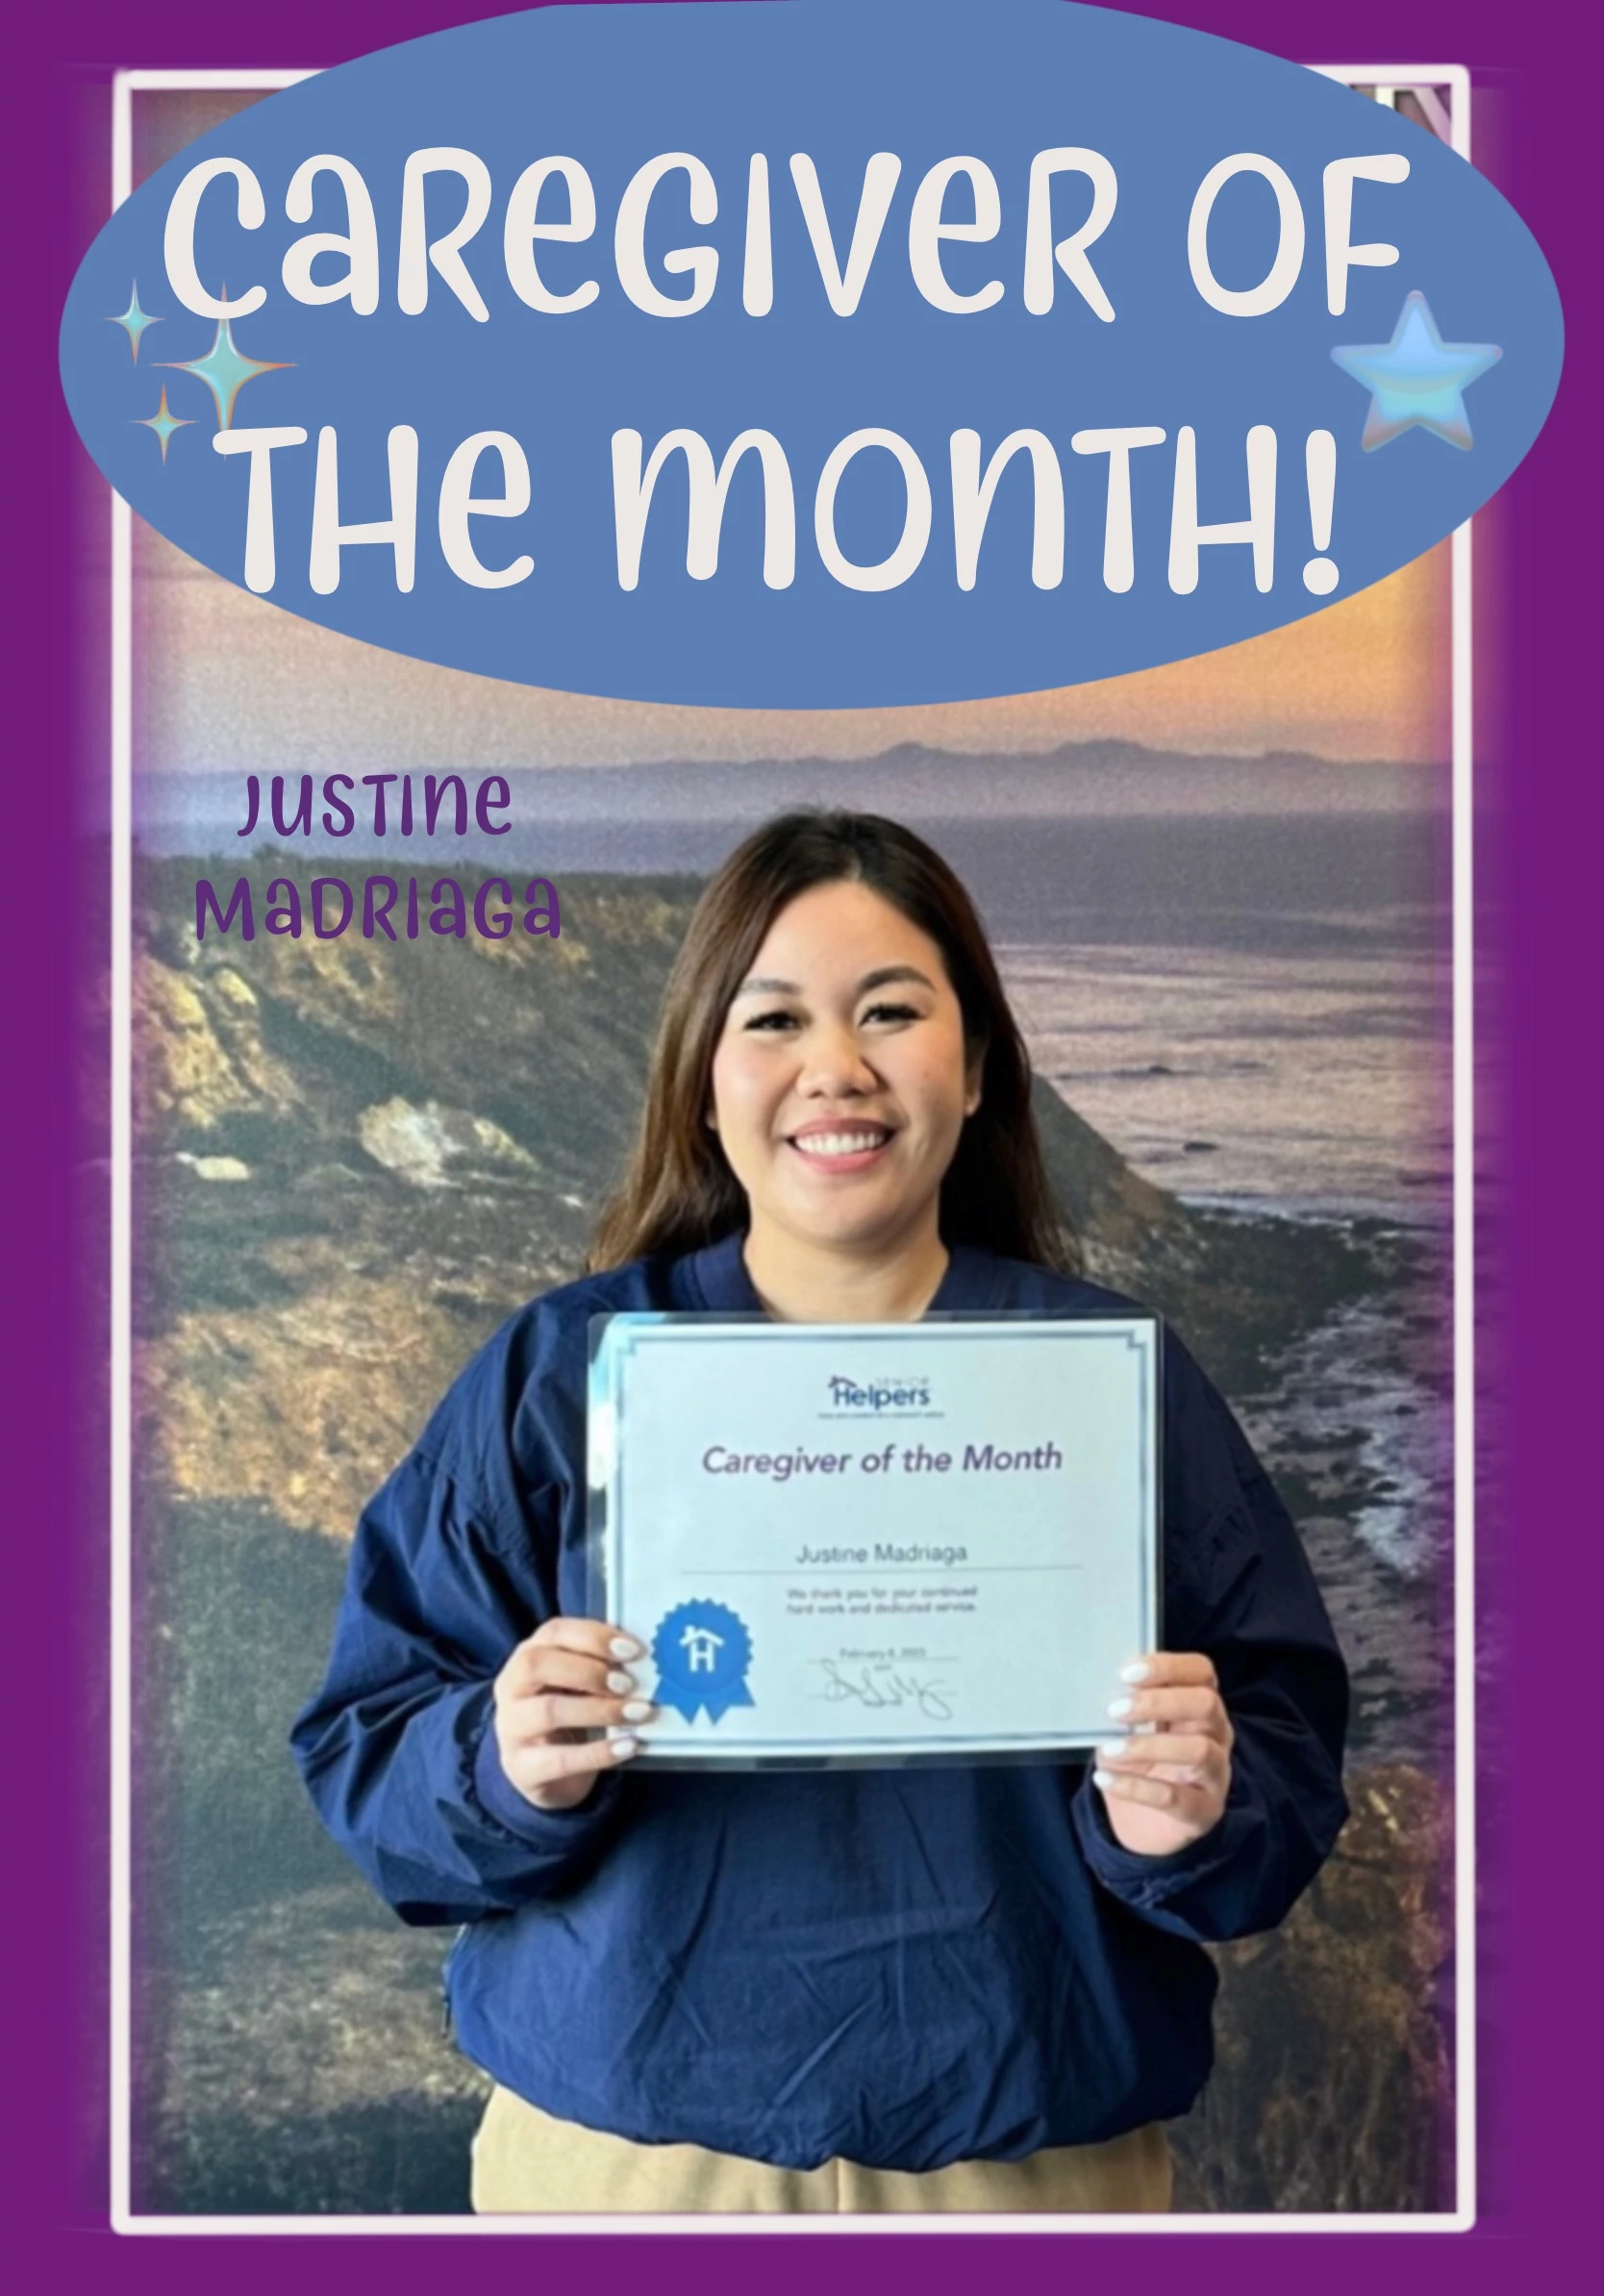 Meet Justine, our Caregiver of the month for February. Justine is kind, friendly, highly skilled in all aspect of companion and personal care, and always dependable. Justine spent many years working in a Skilled Nursing Facility, and now works for Senior Helpers, where she currently serves one of our clients in the City of Orange, CA. We are all lucky to have her on our caregiving team.